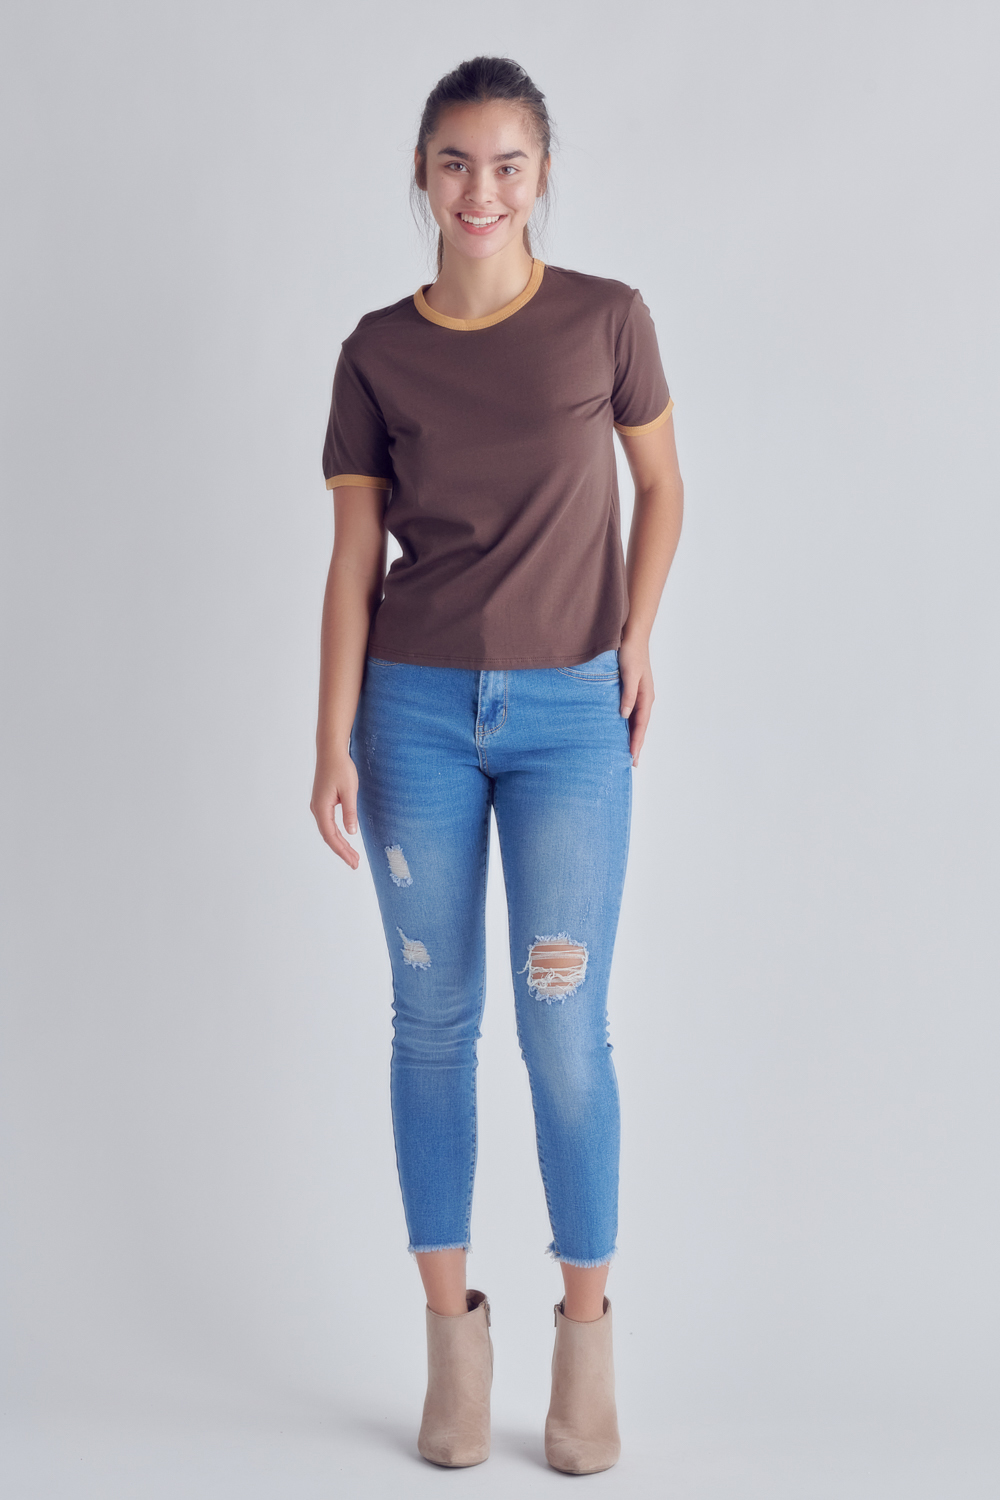 Colorblocked Casual Top